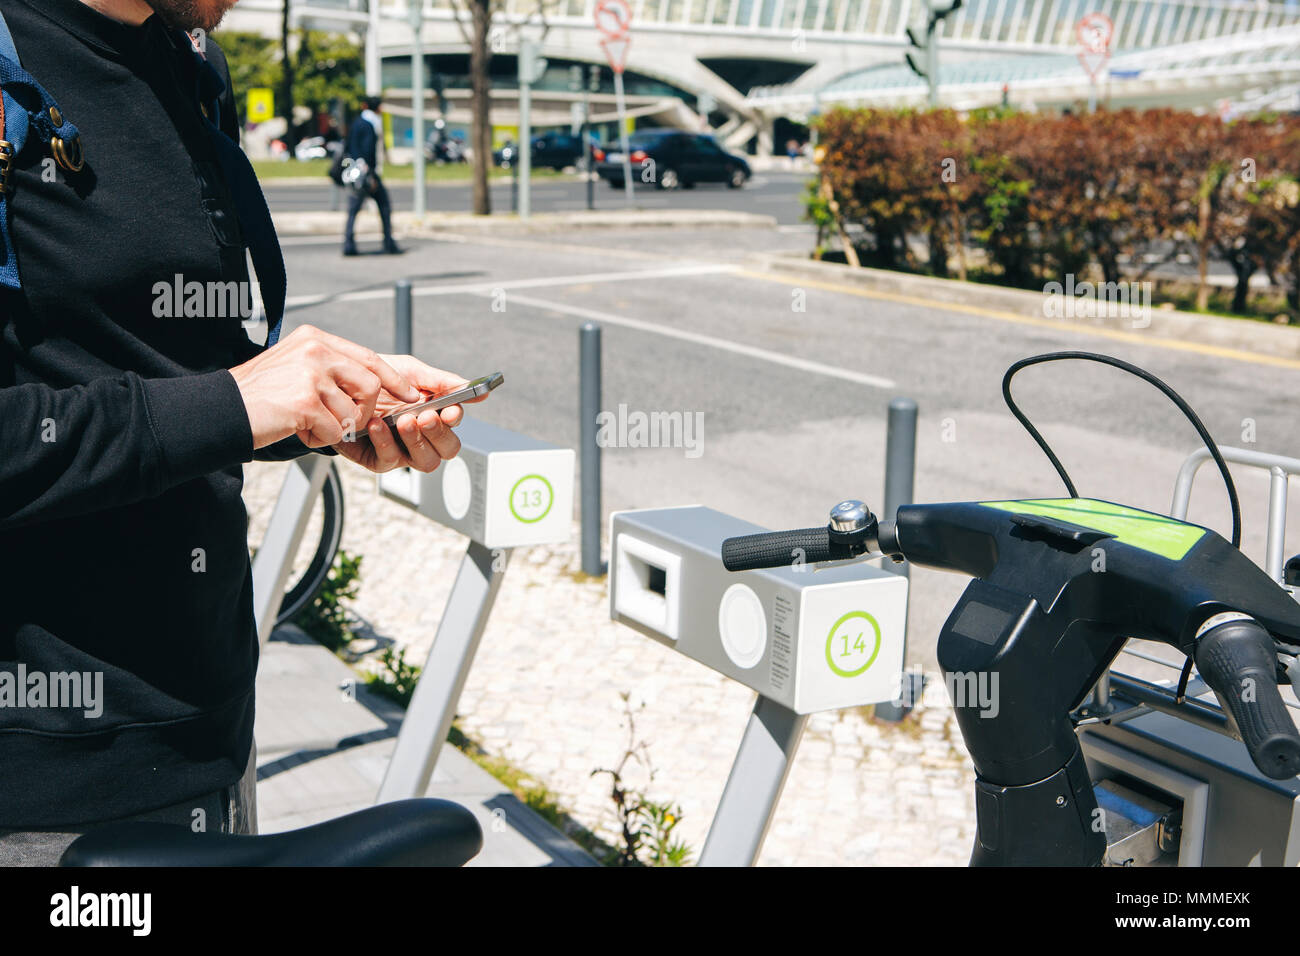 A male tourist hires a bicycle or an alternative environmental mode of transport using a mobile application on his phone. Or he simply dials a number and calls or uses the Internet on the street. Stock Photo